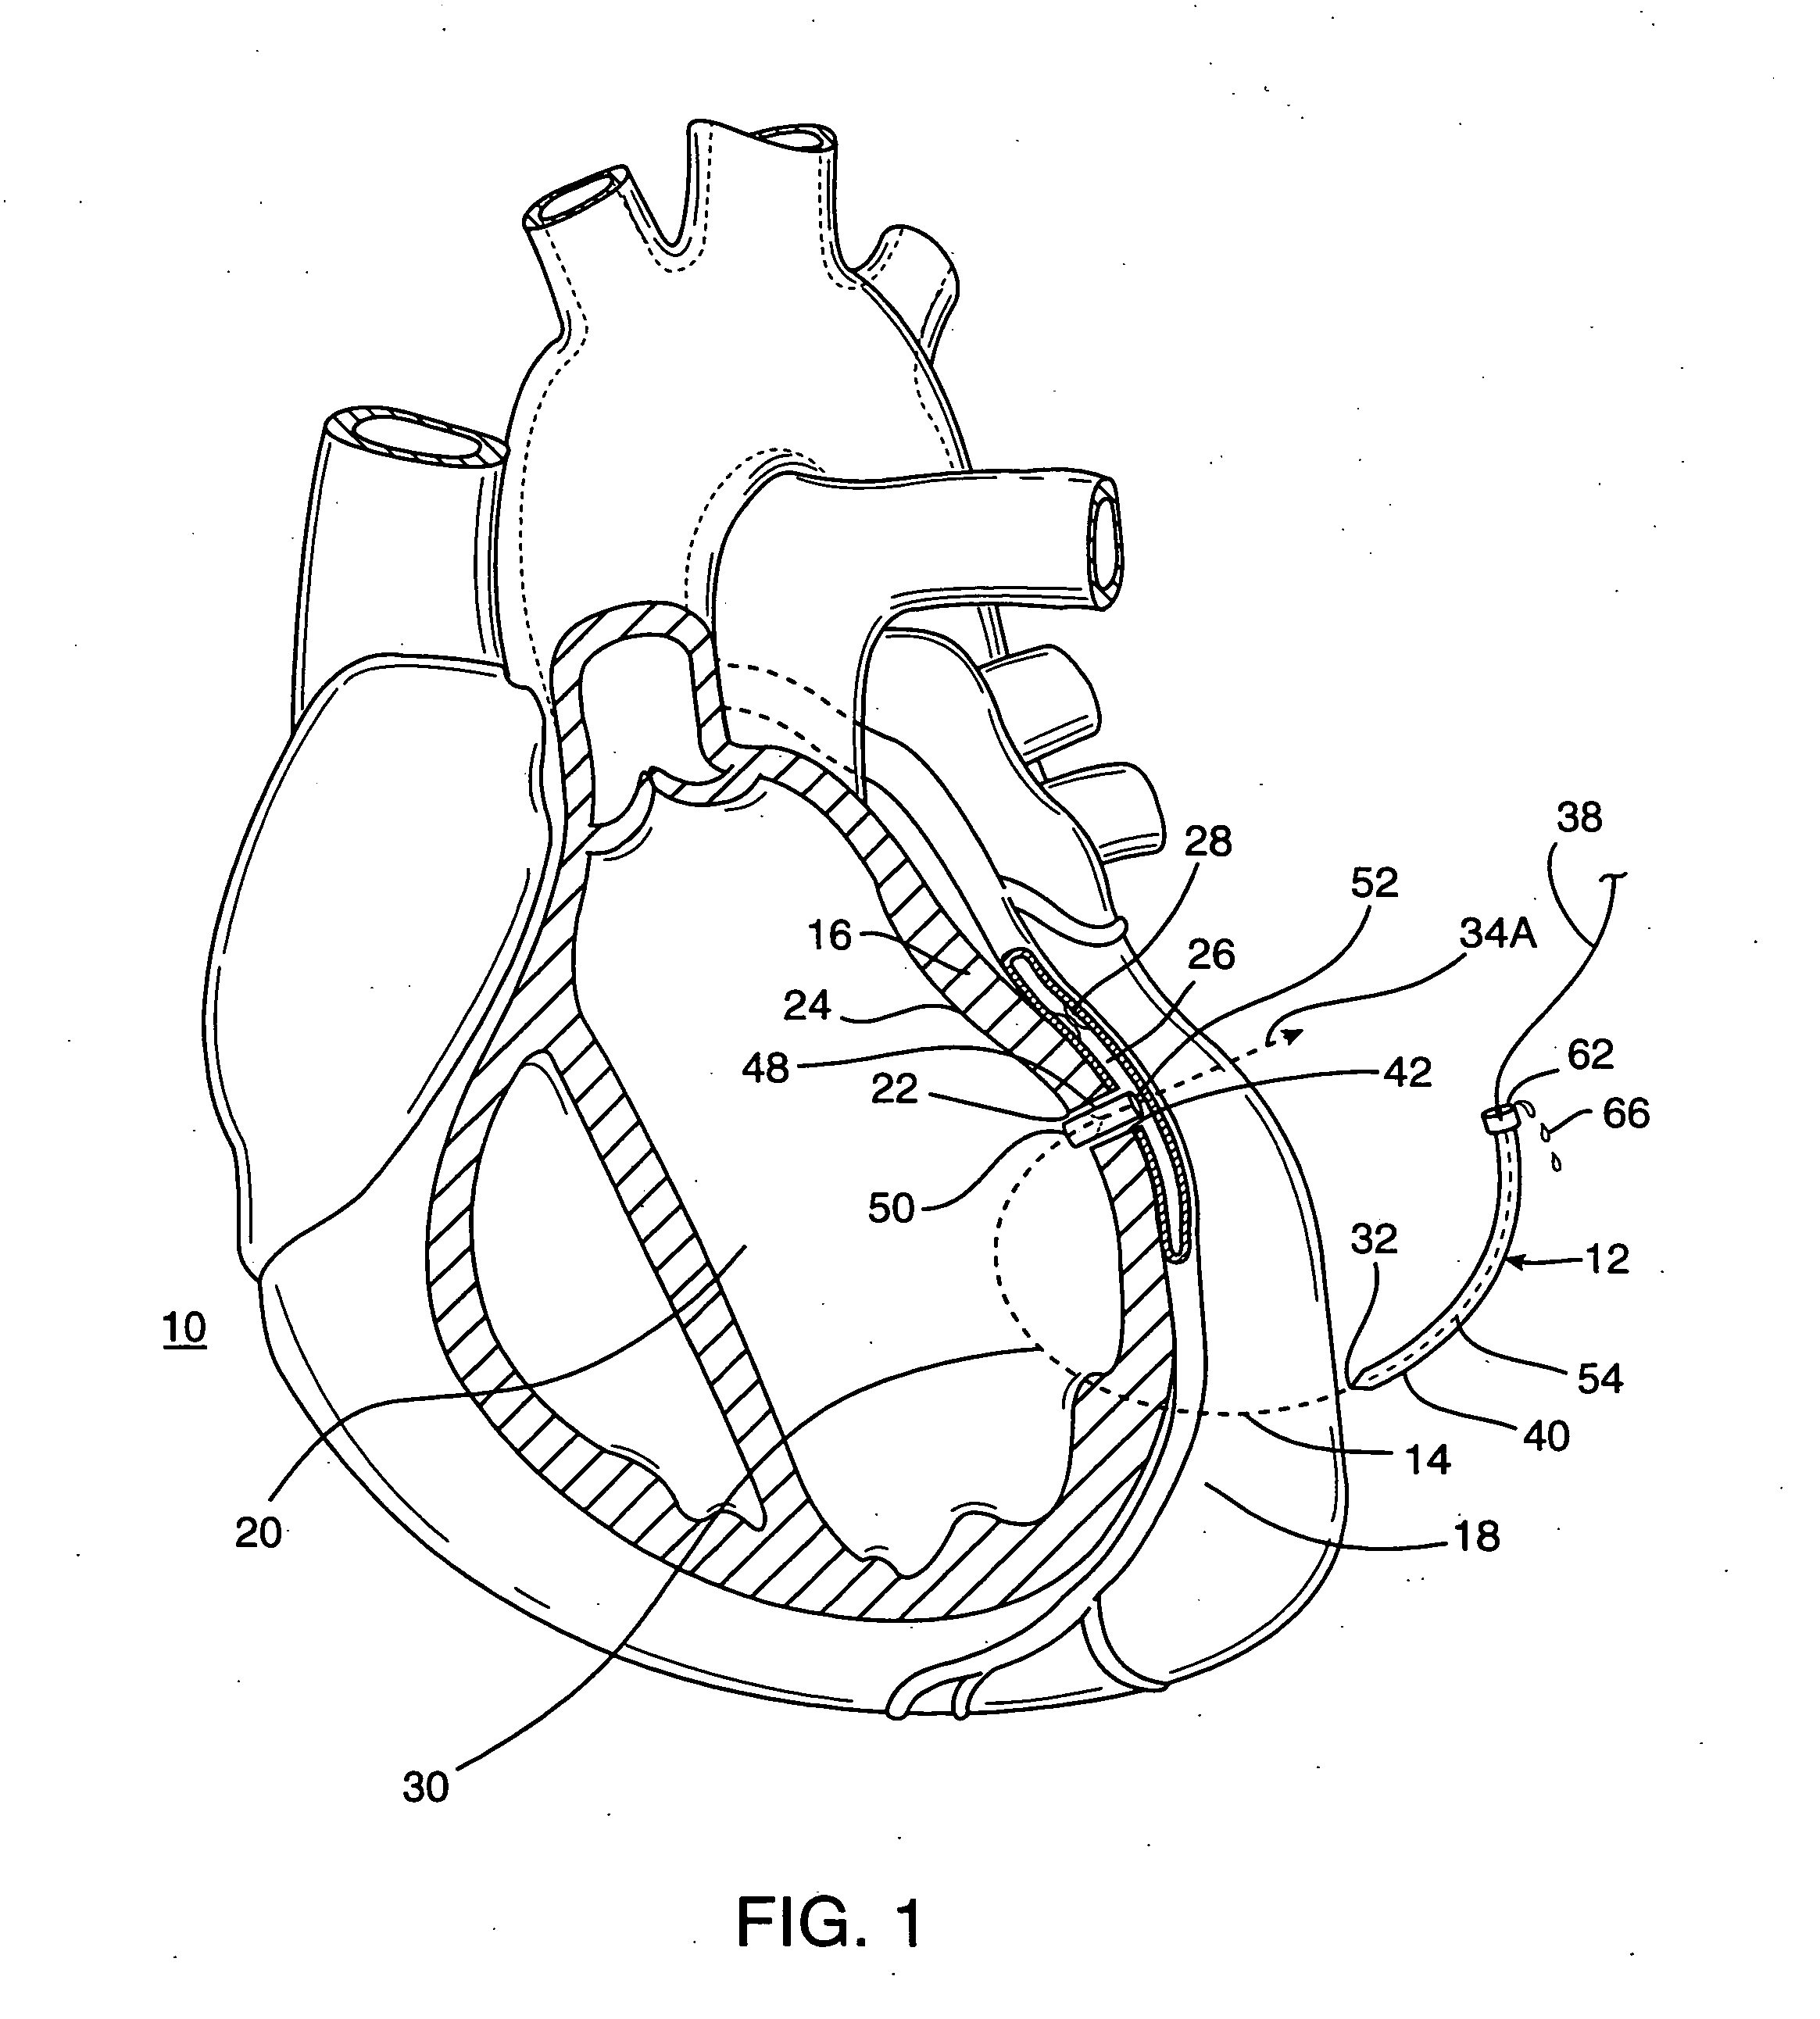 Methods and devices providing transmyocardial blood flow to the arterial vascular system of the heart